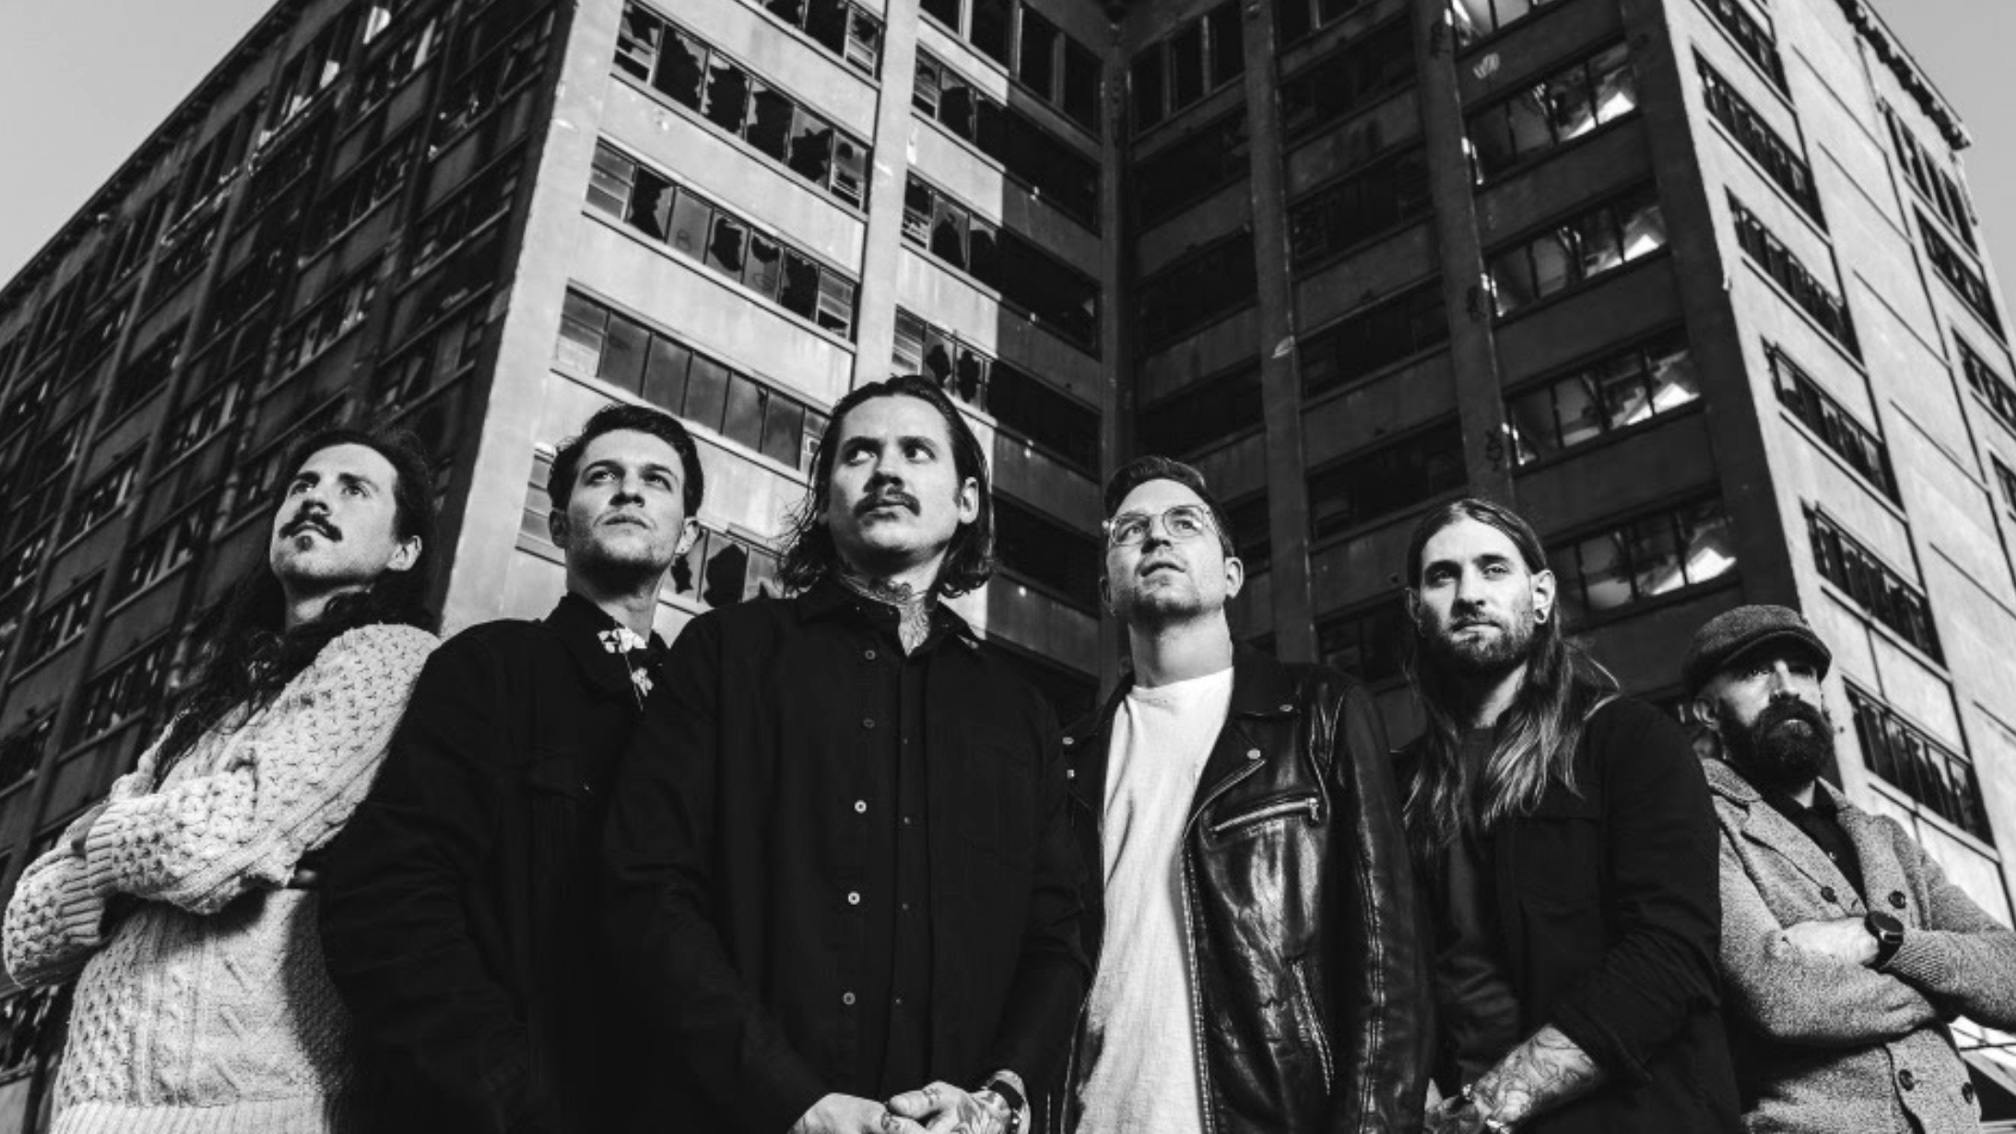 The Devil Wears Prada announce new EP: "The heaviest music of our career…"